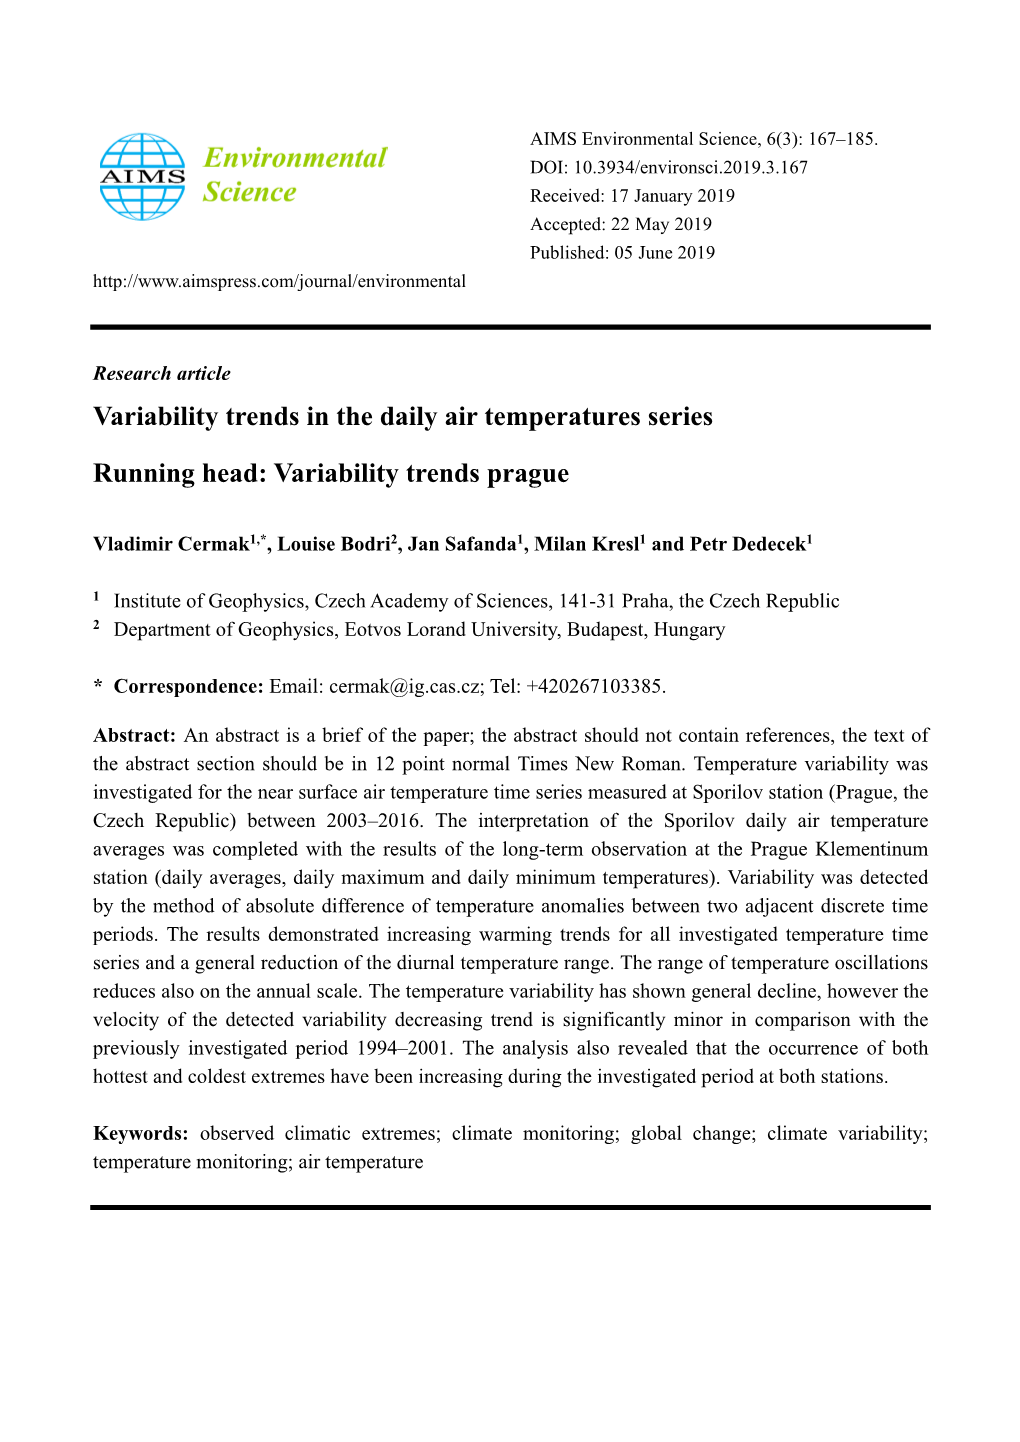 Variability Trends in the Daily Air Temperatures Series